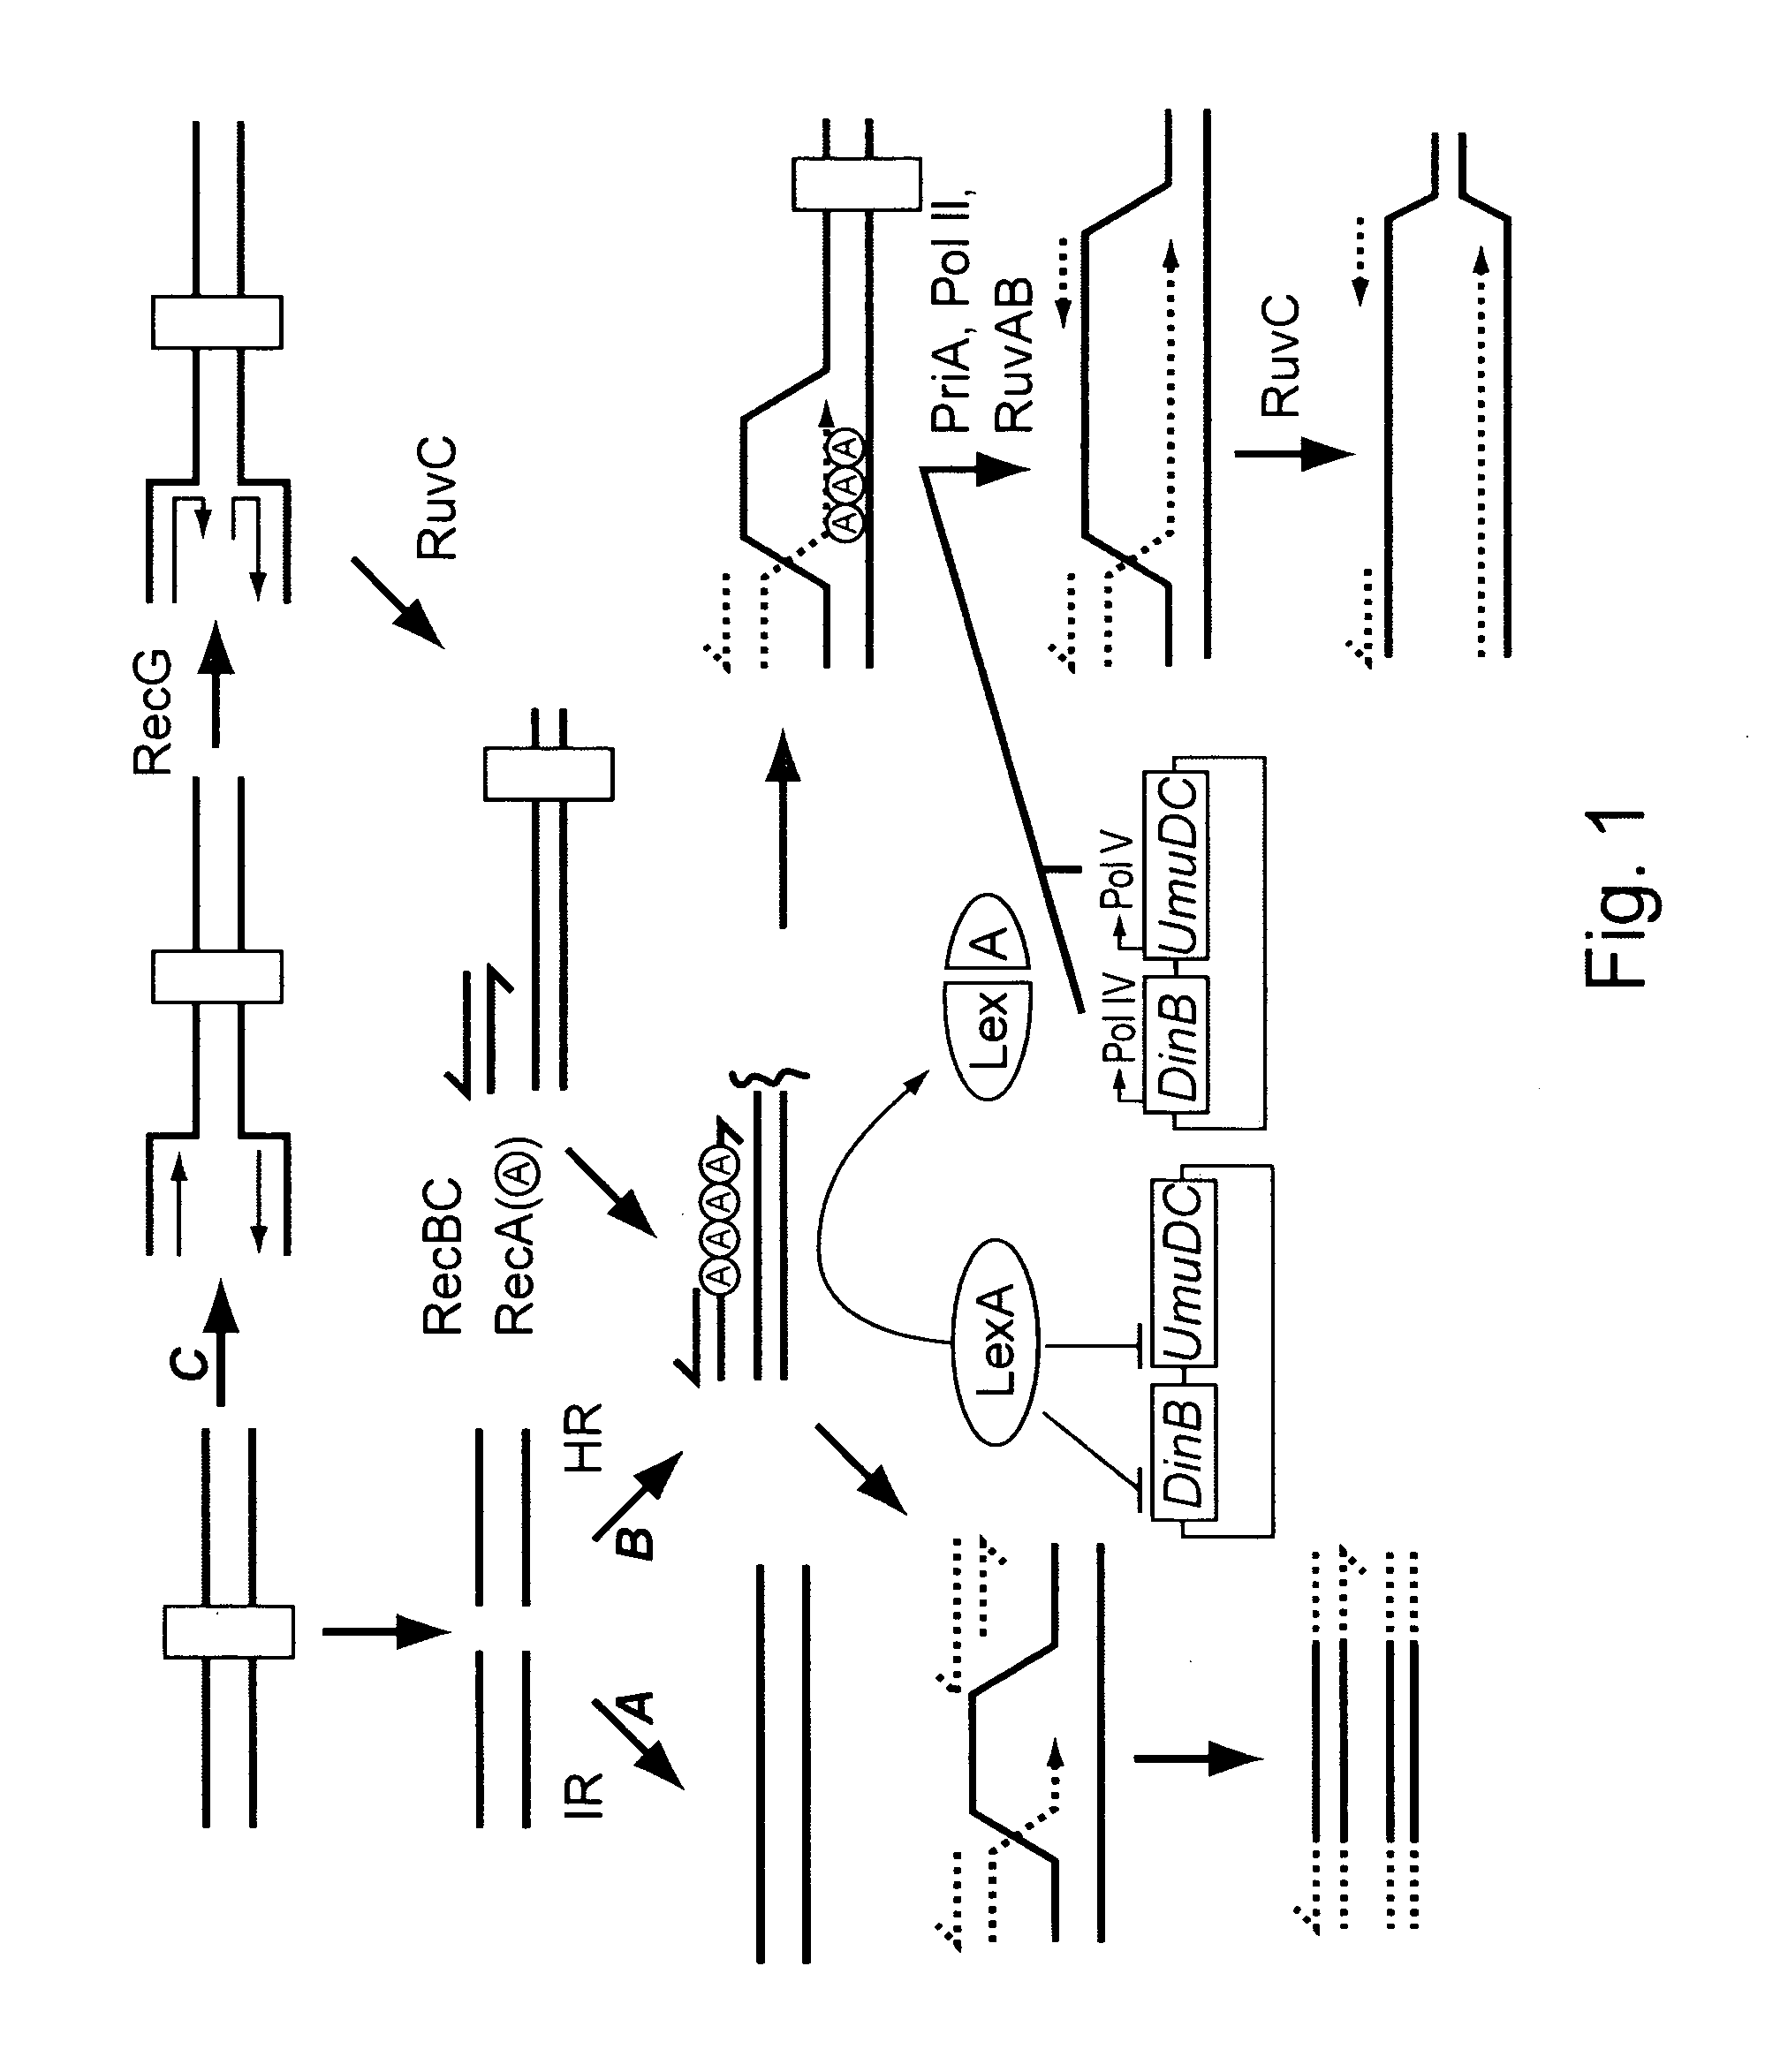 Business methods for commercializing antimicrobial and cytotoxic compounds